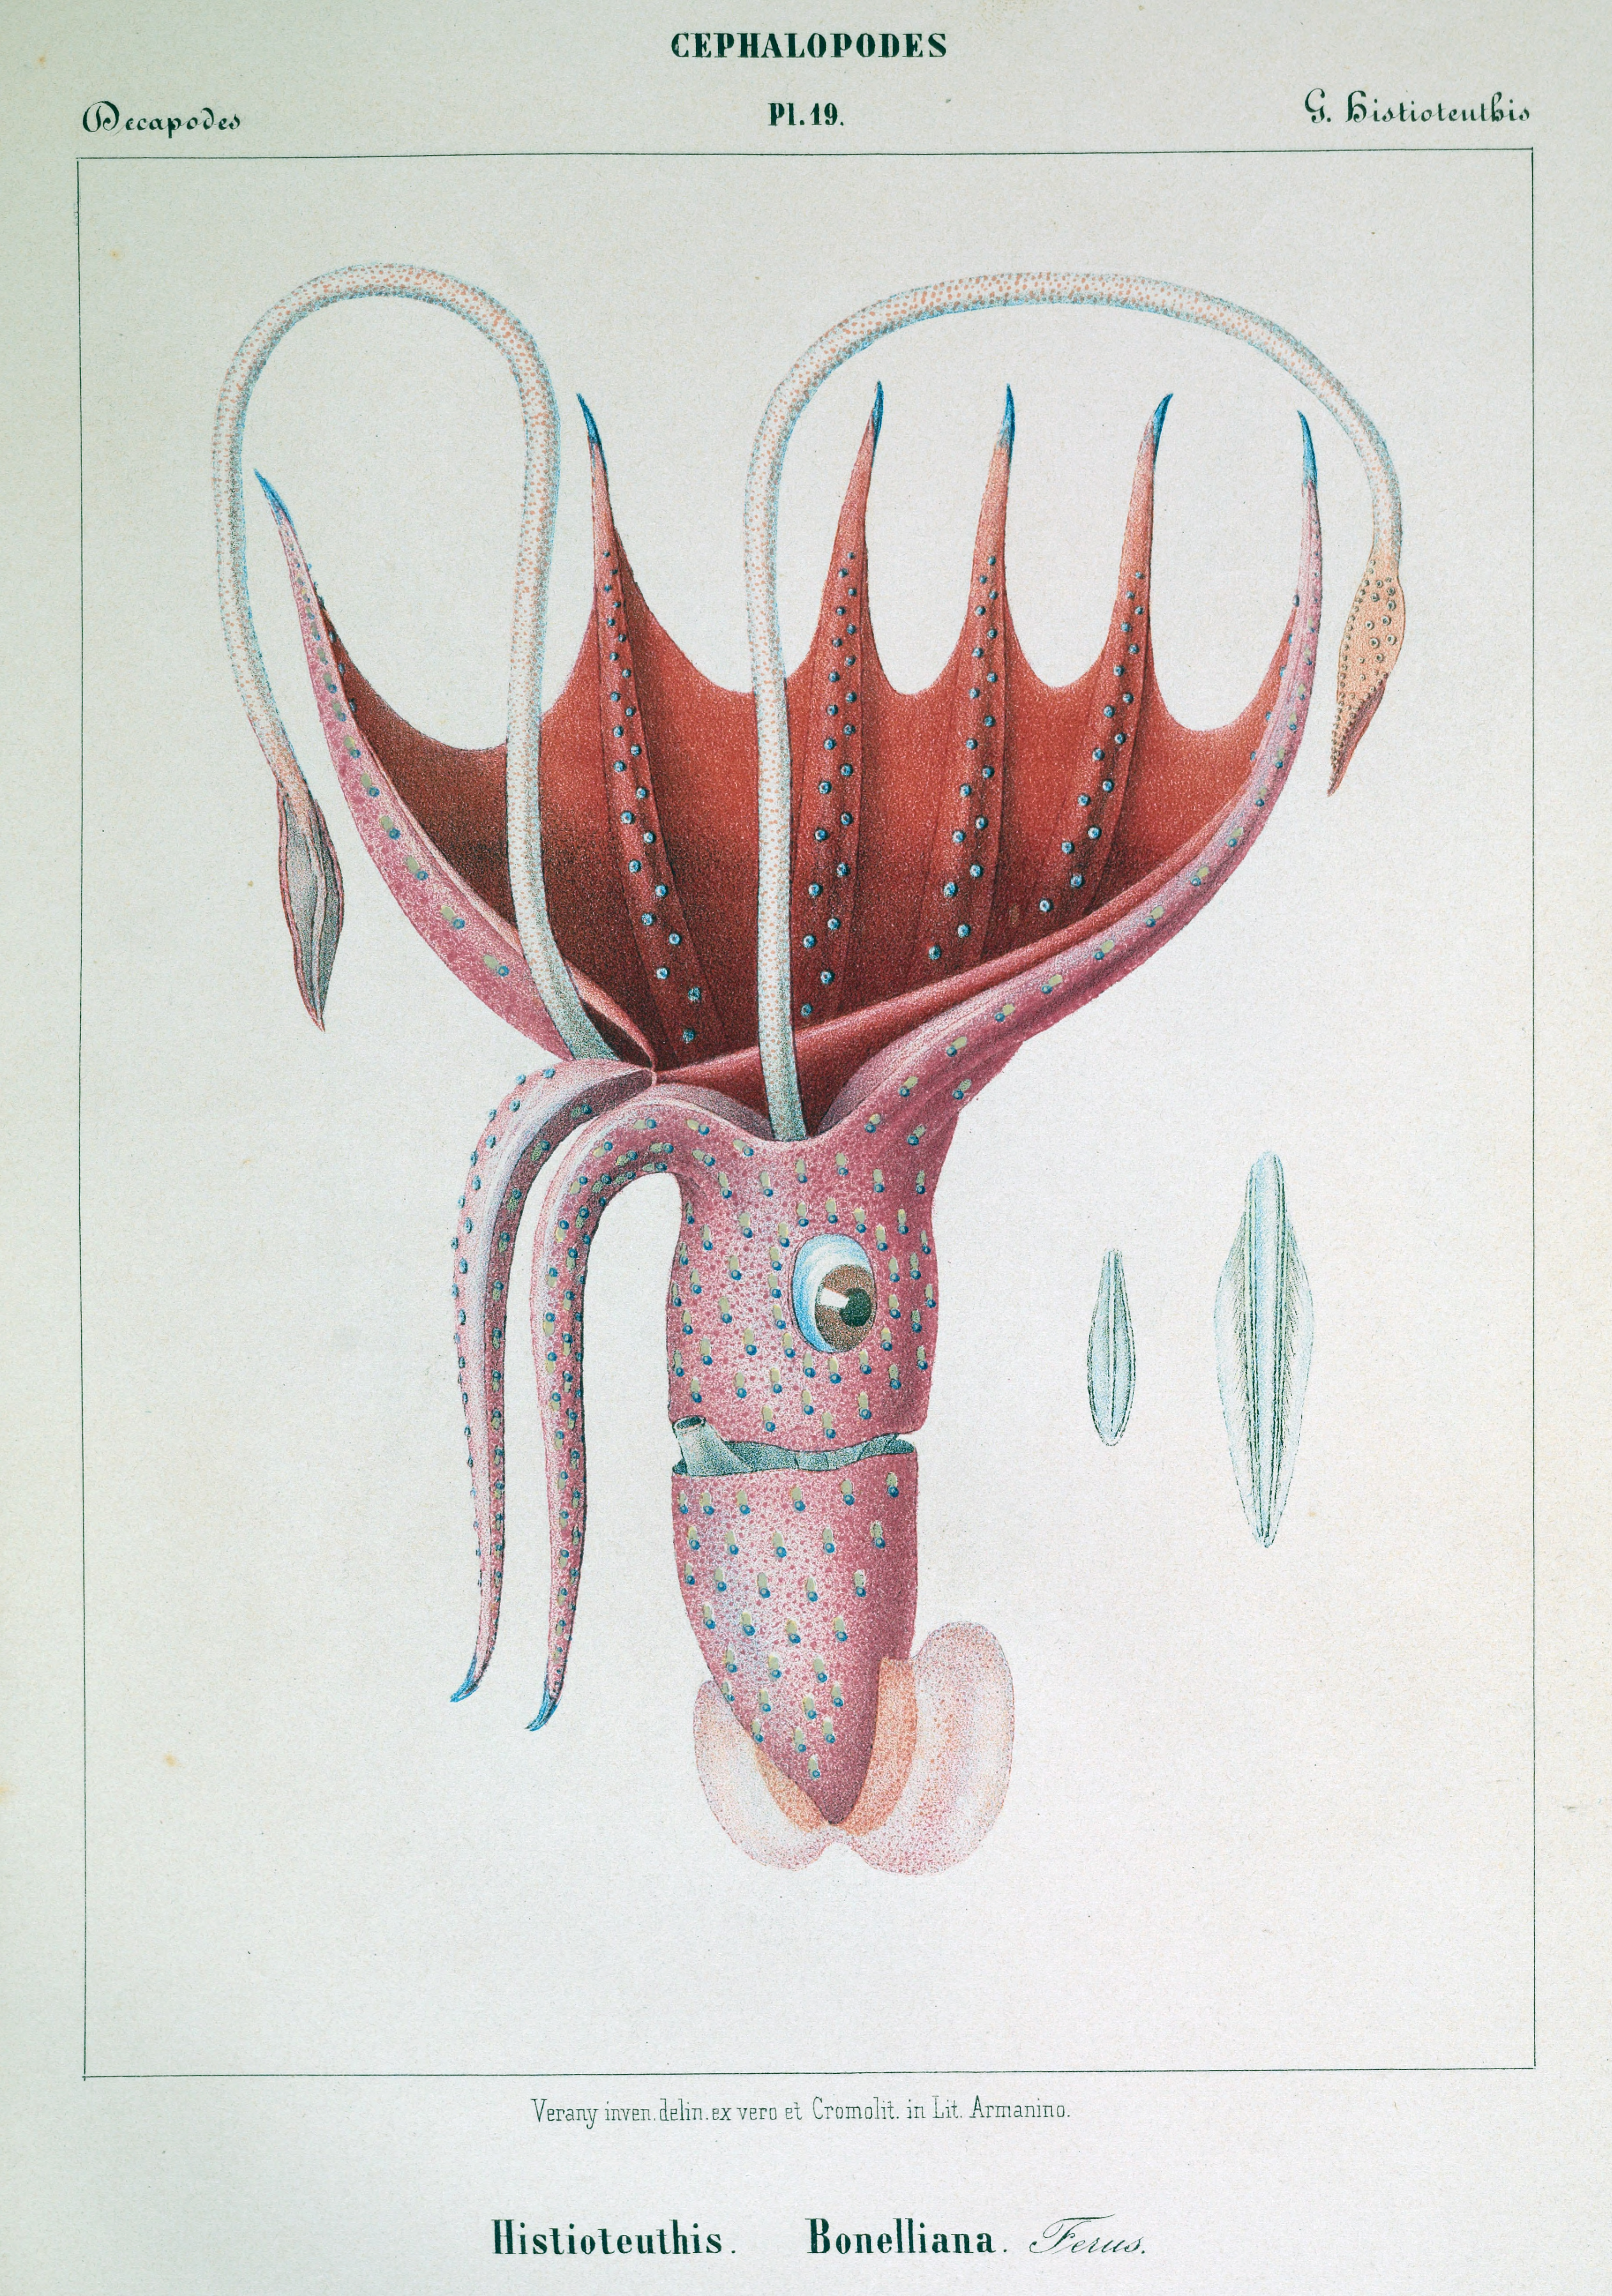 Plate 19 from Verany's Monograph